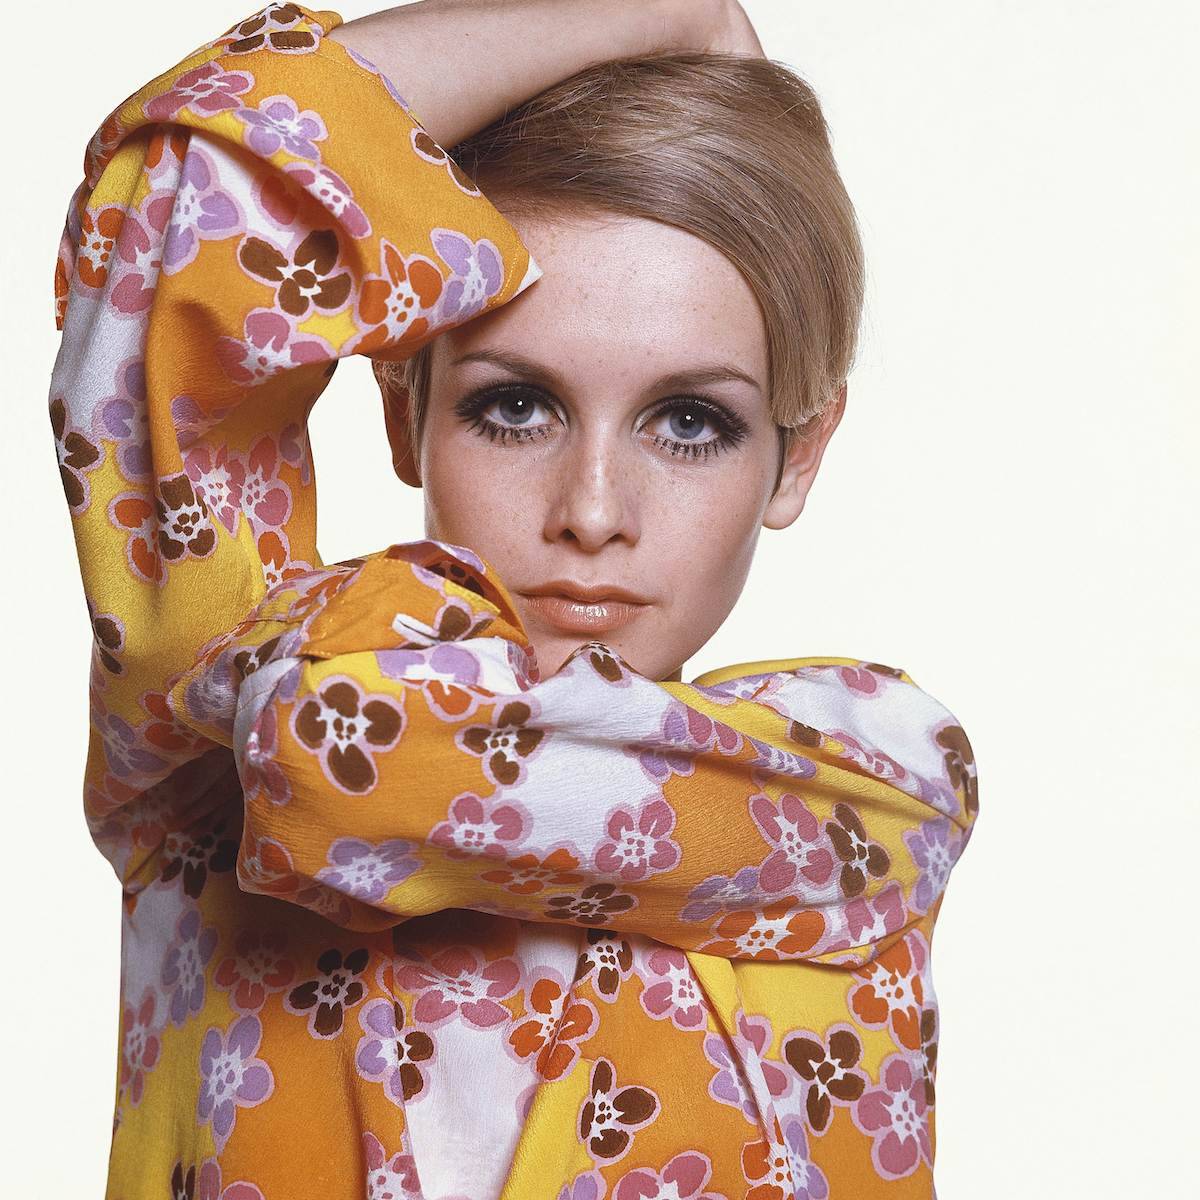 Twiggy (Fot. Getty Images)